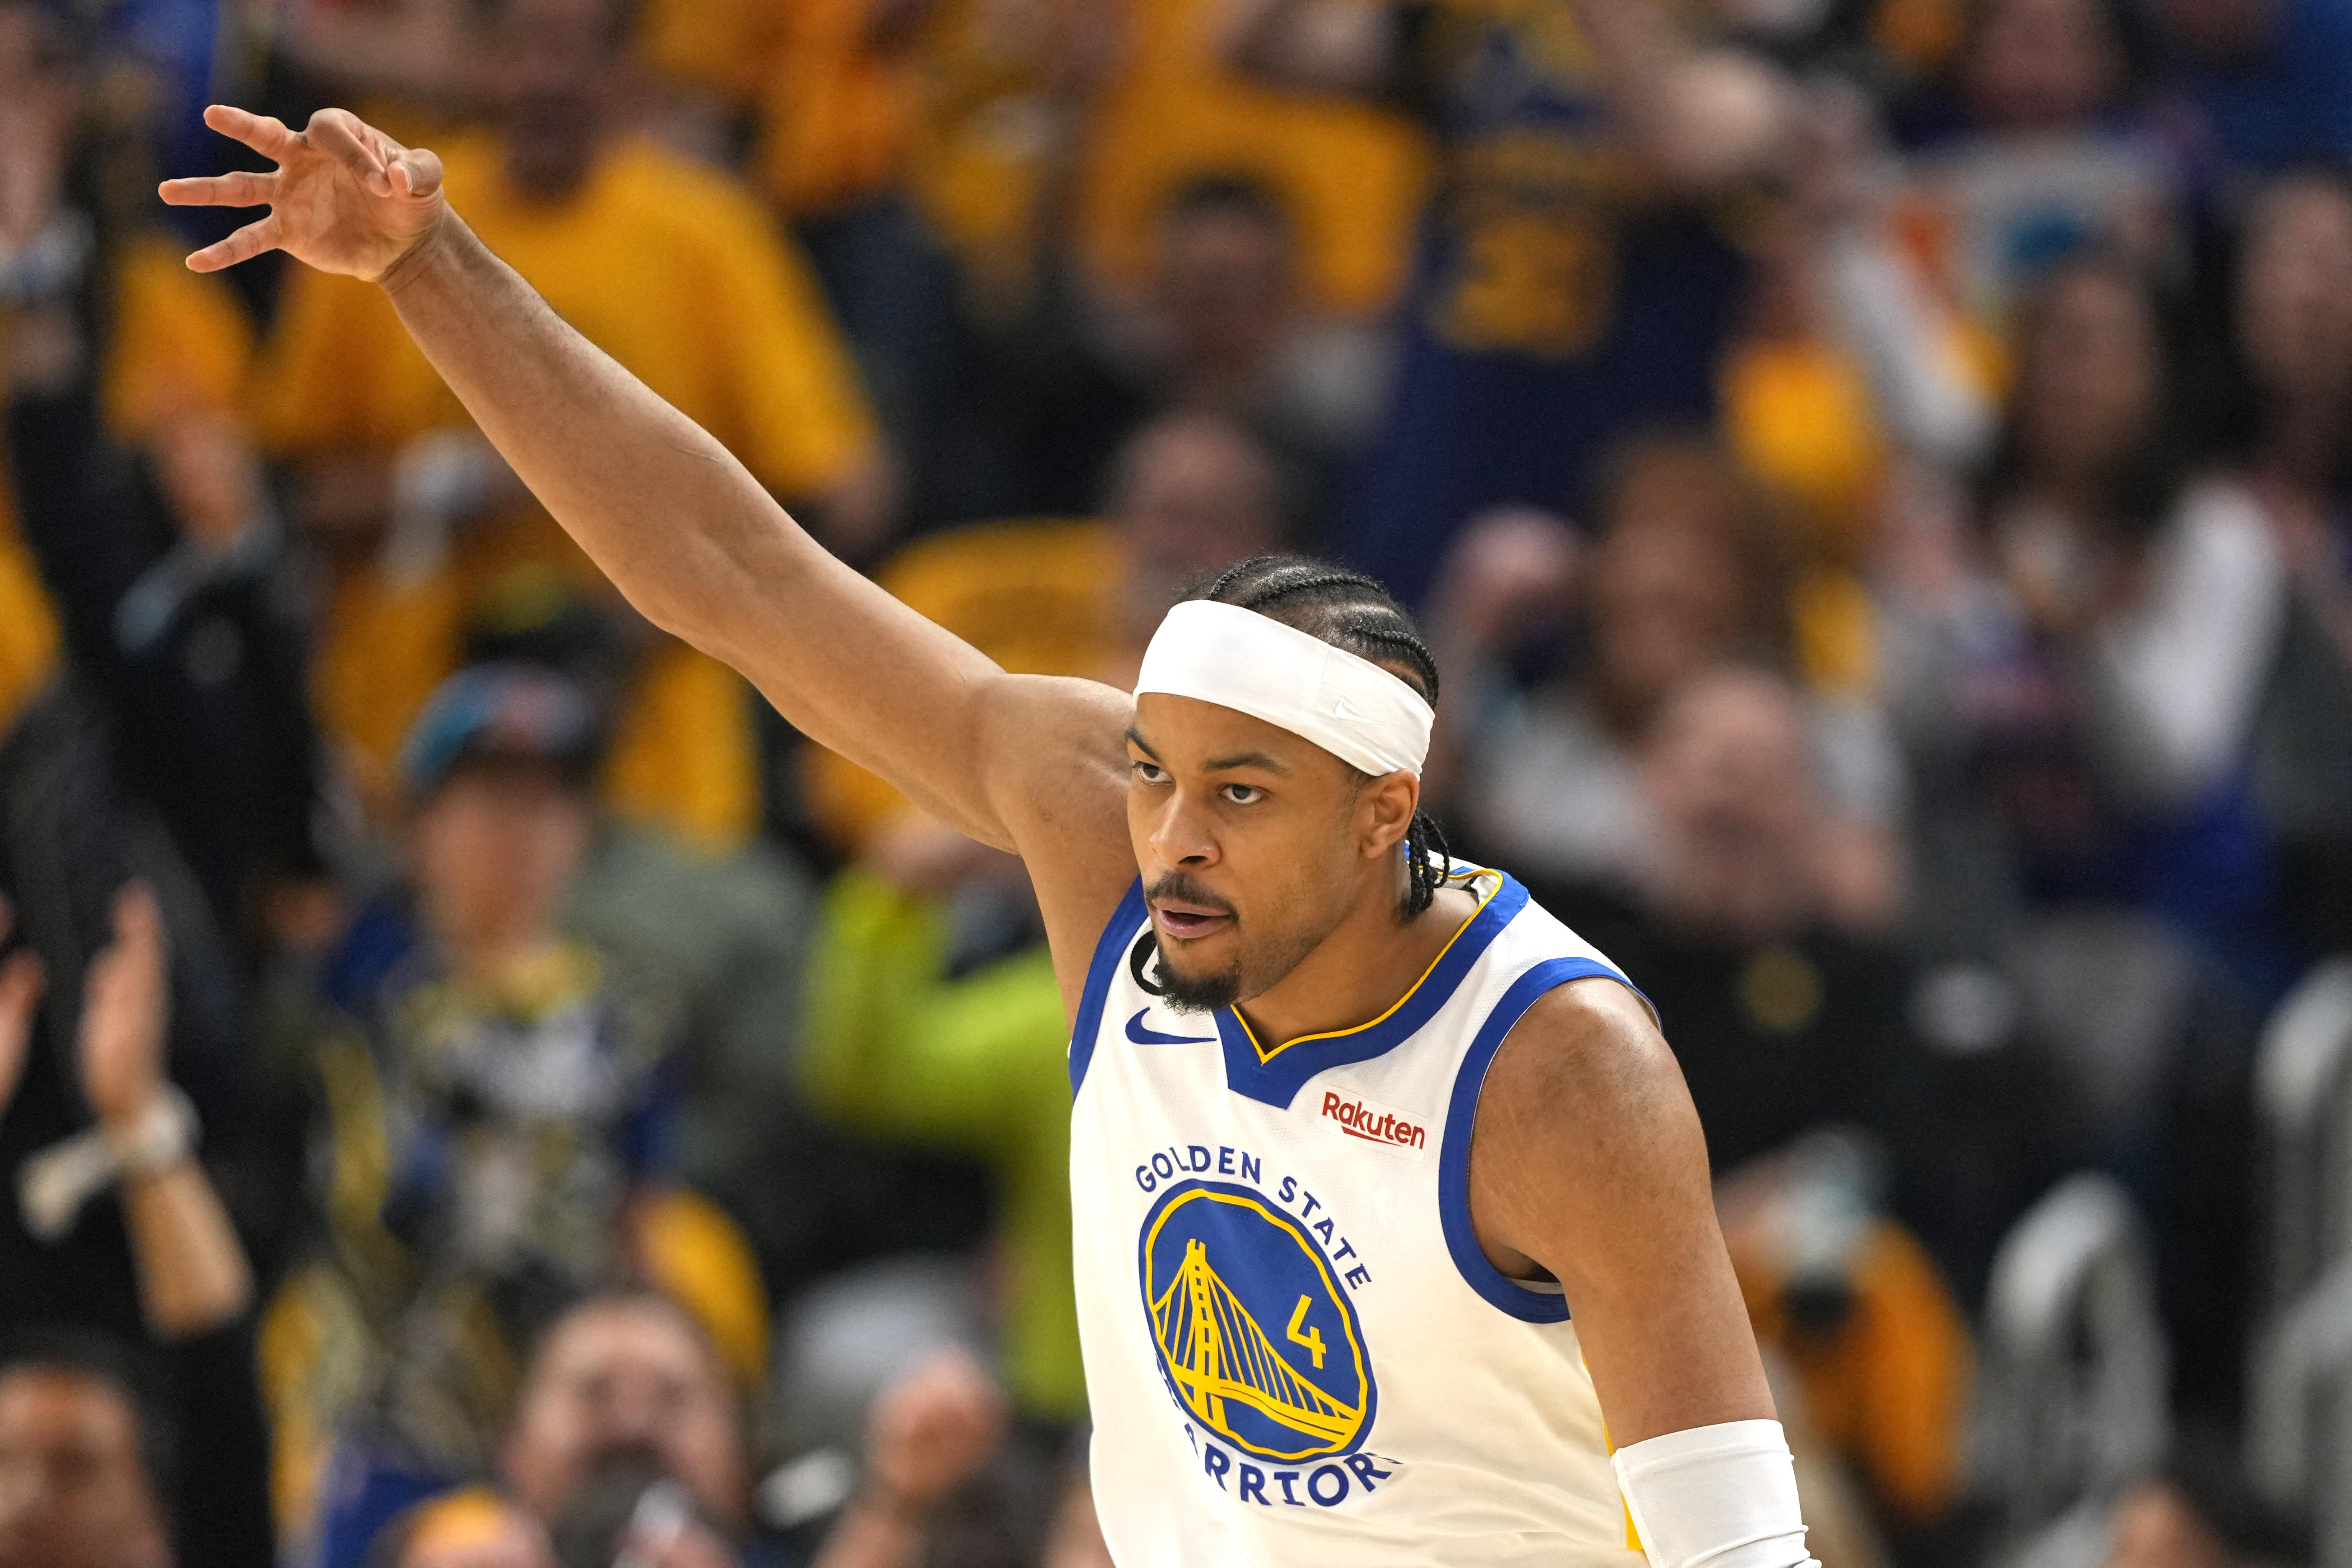 Warriors beat Celtics in Game 6, win 4th NBA title in Stephen Curry era 